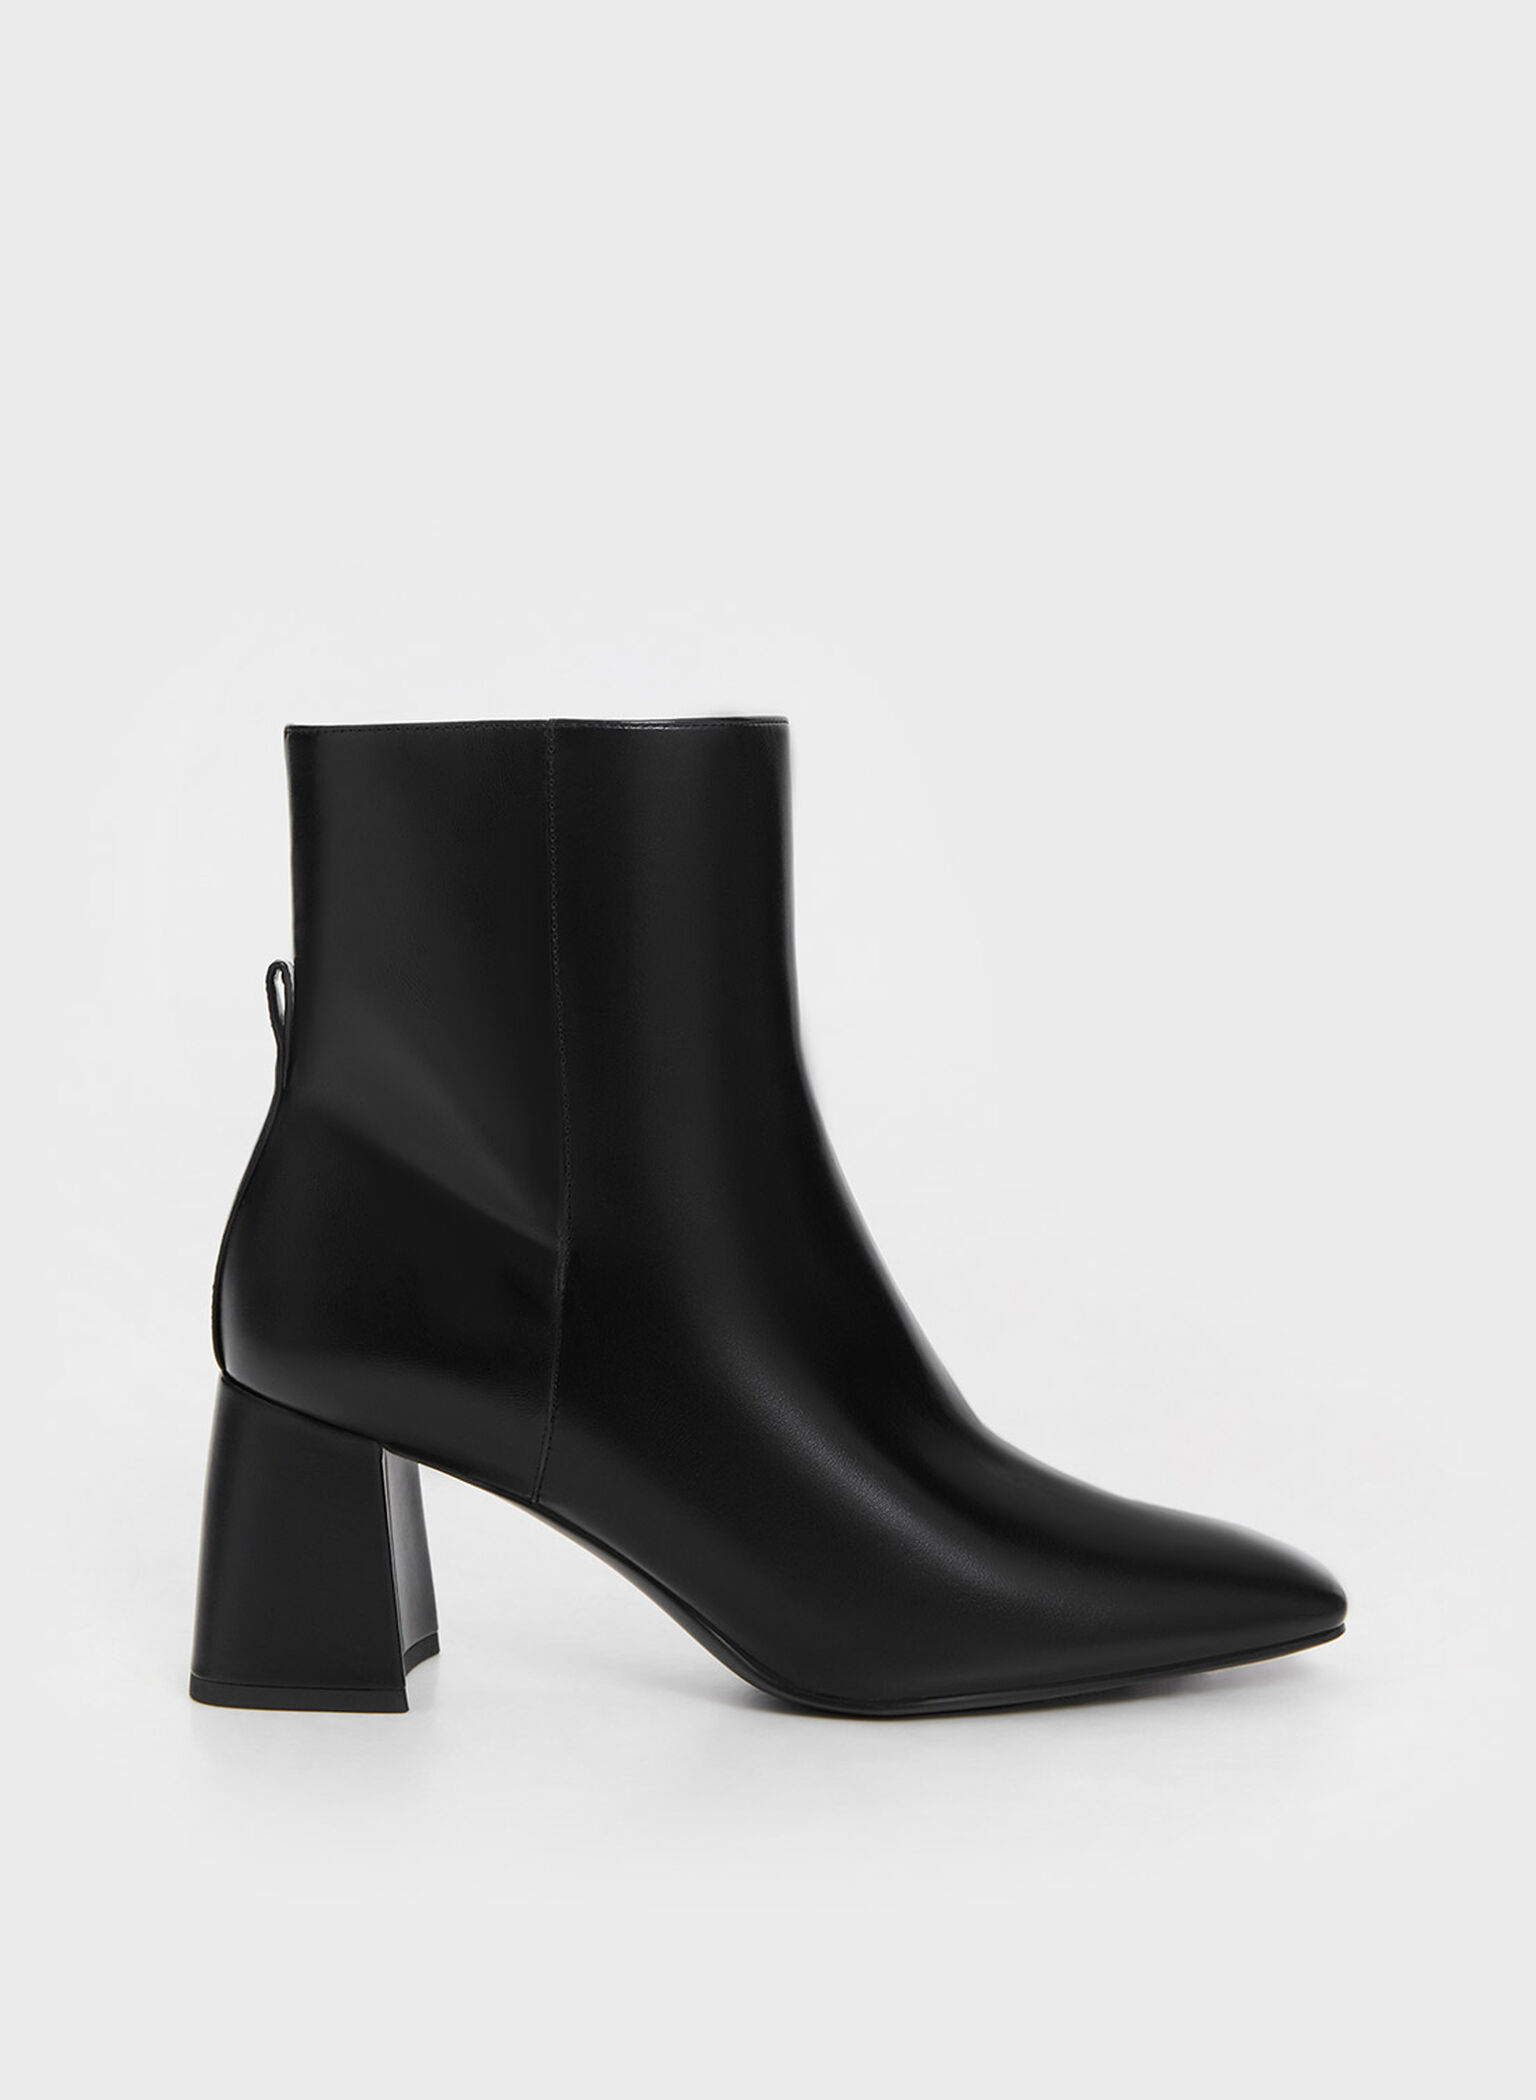 Black Curved Block Heel Ankle Boots - CHARLES & KEITH US